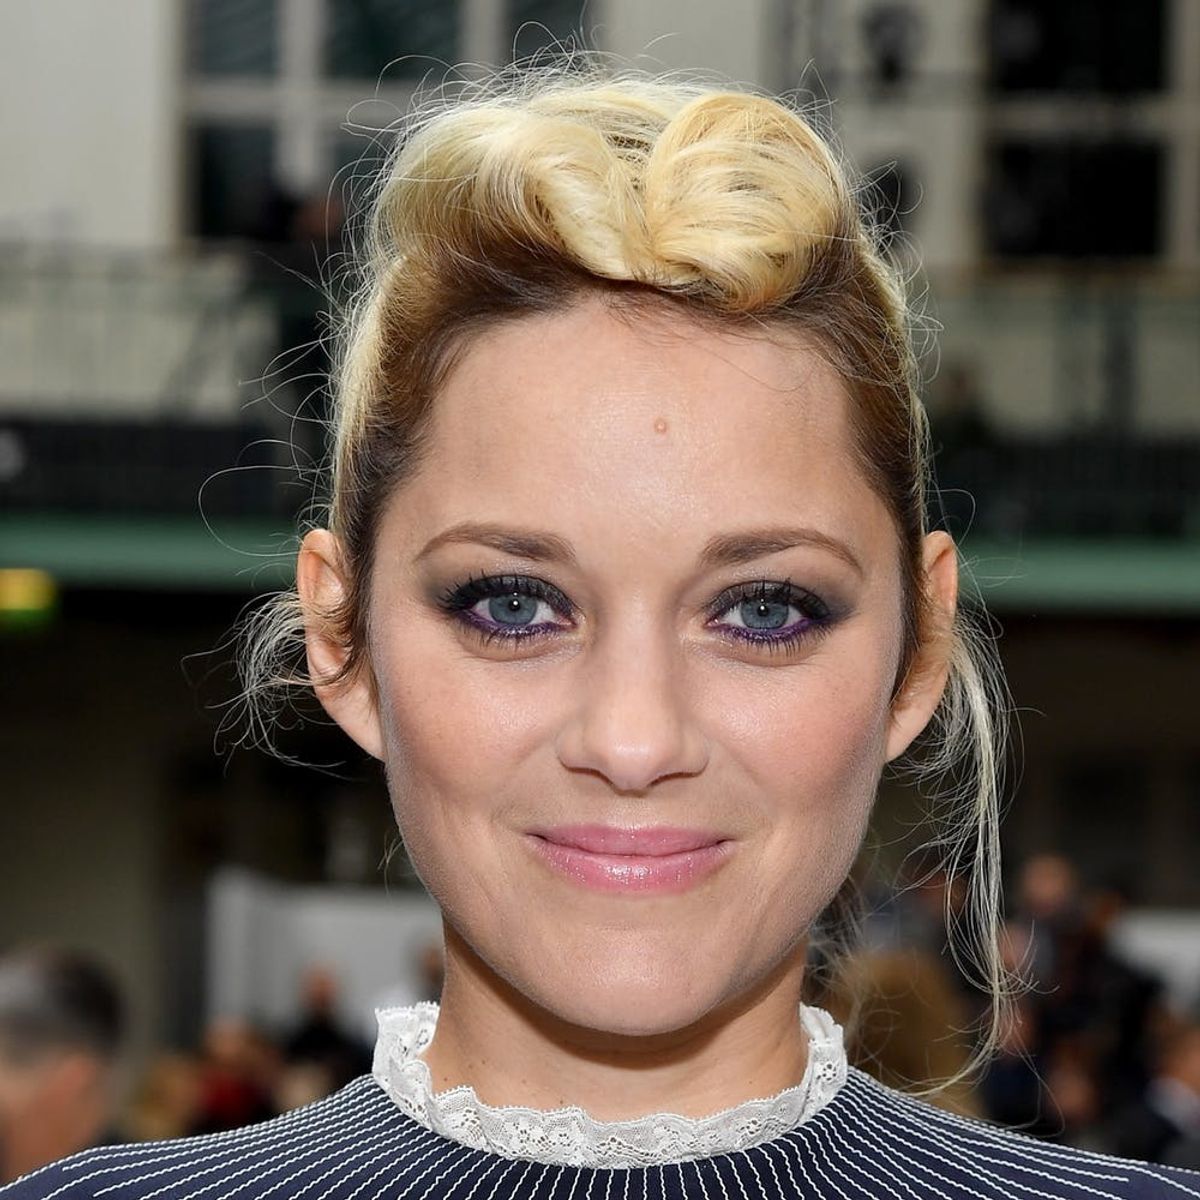 Marion Cotillard Looked Like a RL Unicorn in These Eye-Popping Iridescent Pants